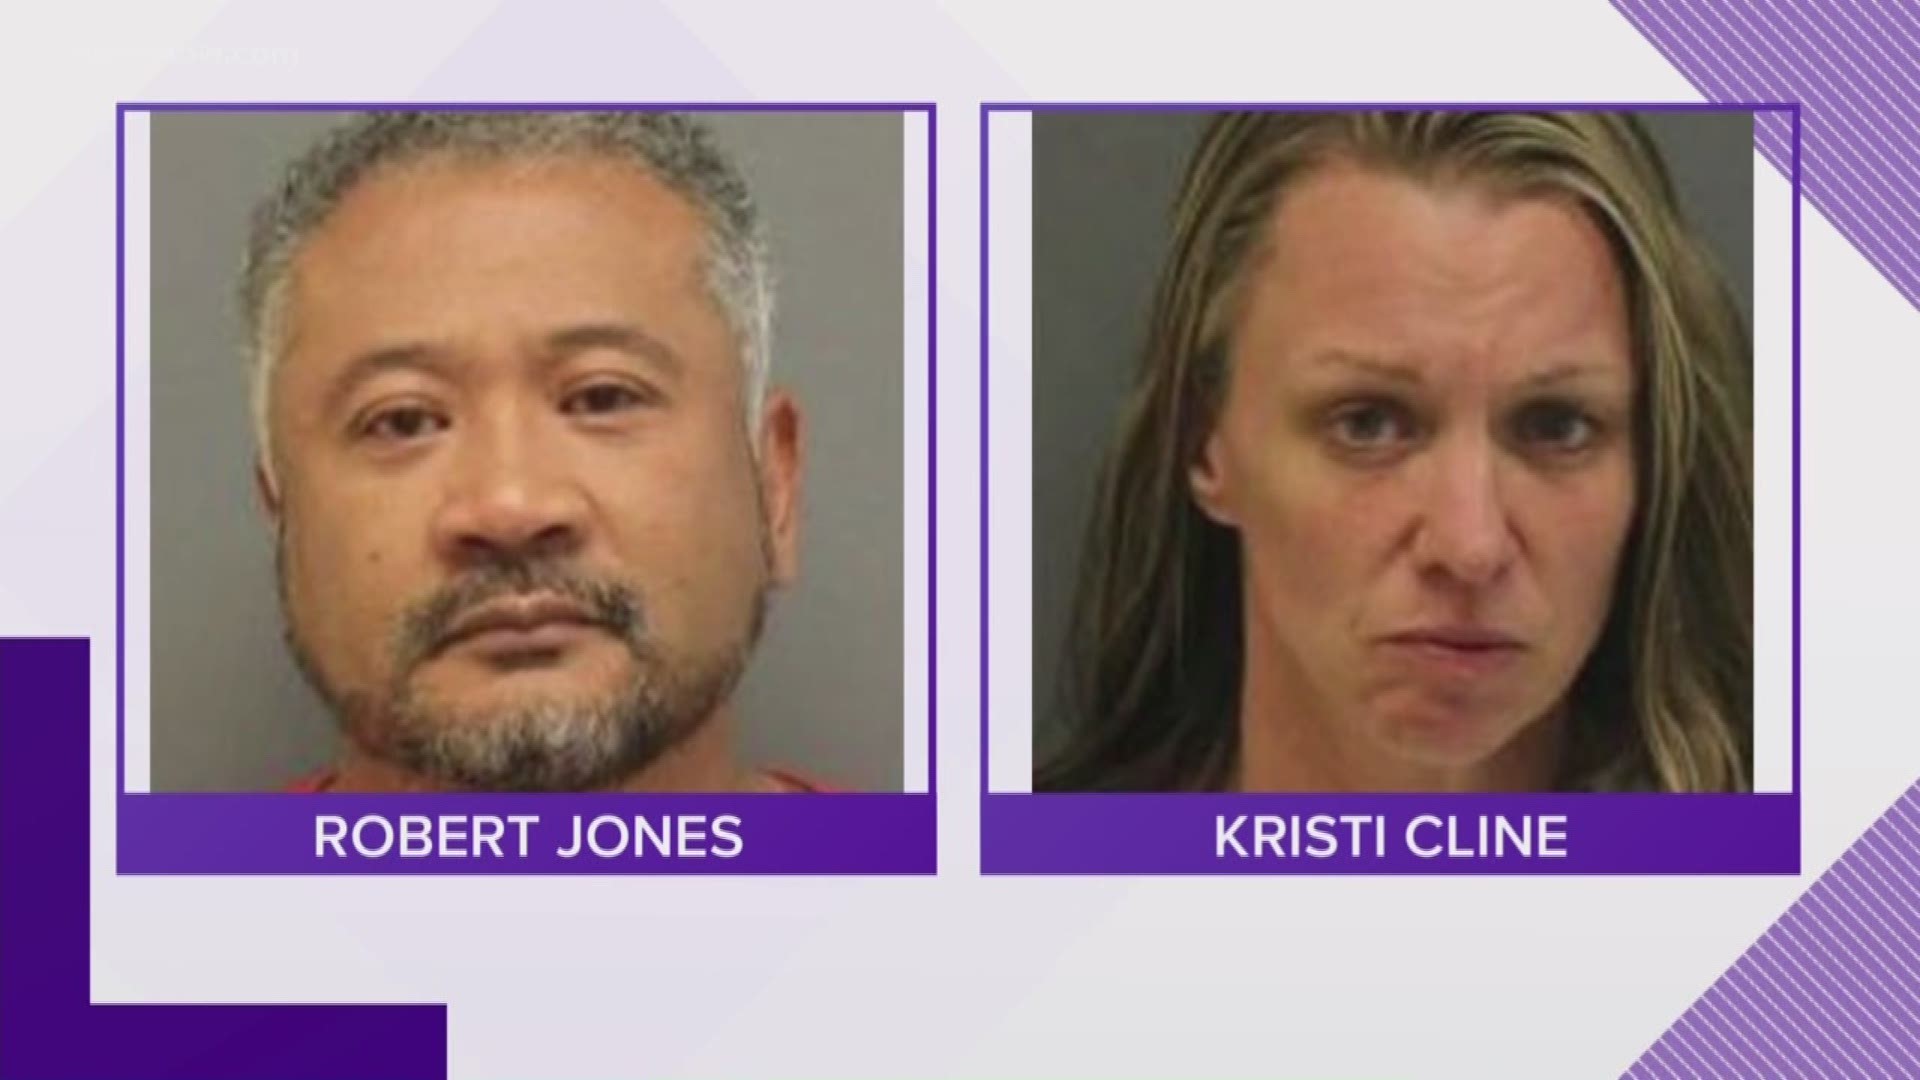 A woman said Newport News police officer Robert Jones and her babysitter, Kristi Cline, repeatedly abused her as a child.